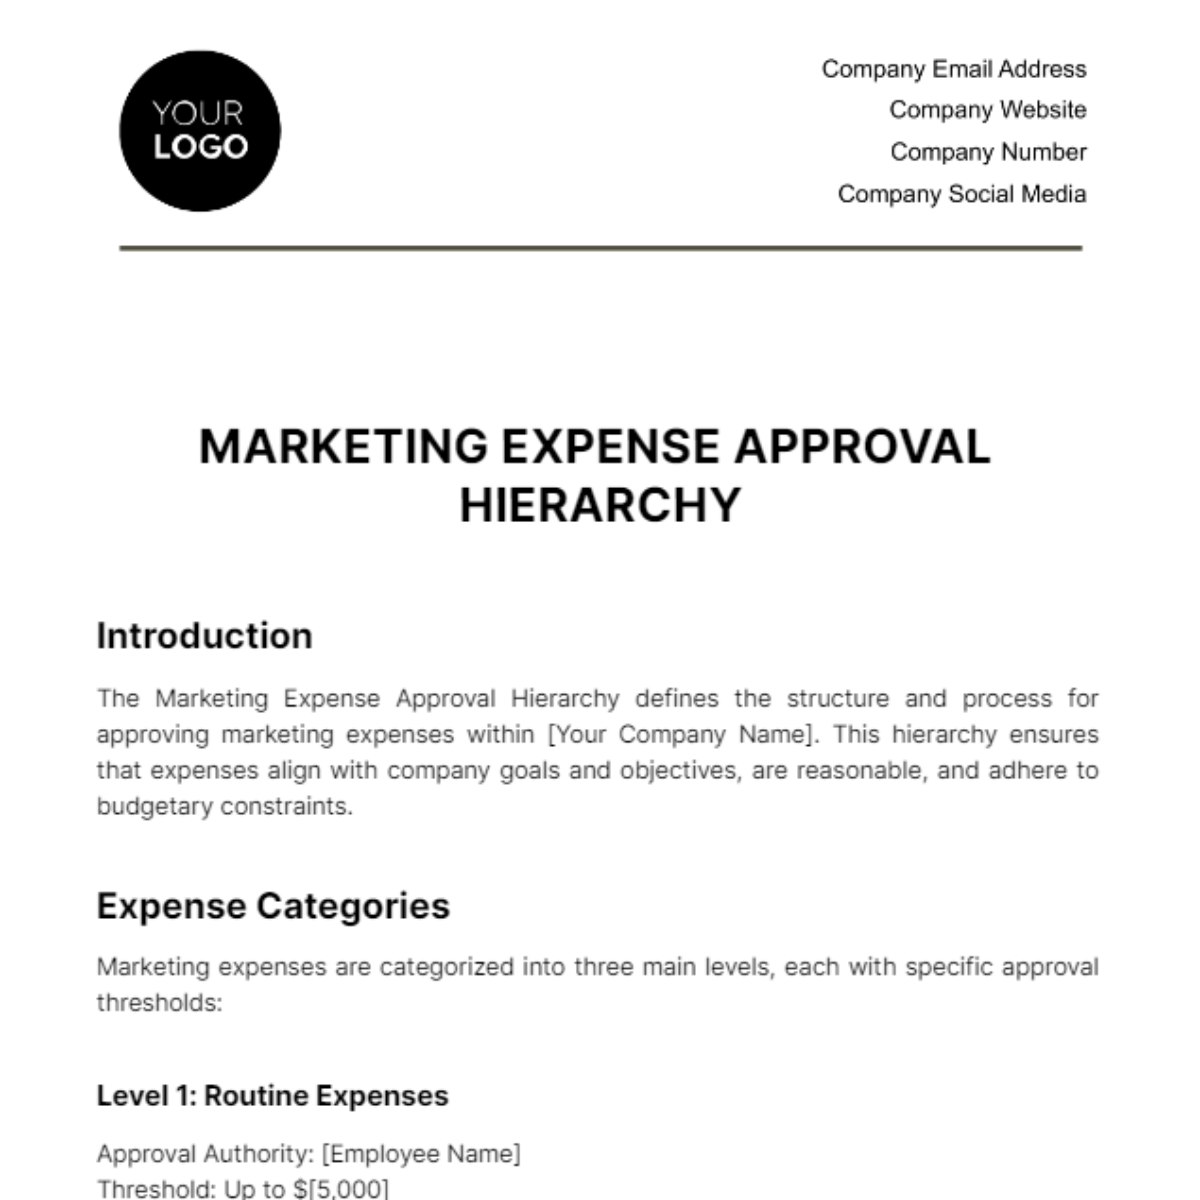 Marketing Expense Approval Hierarchy Template